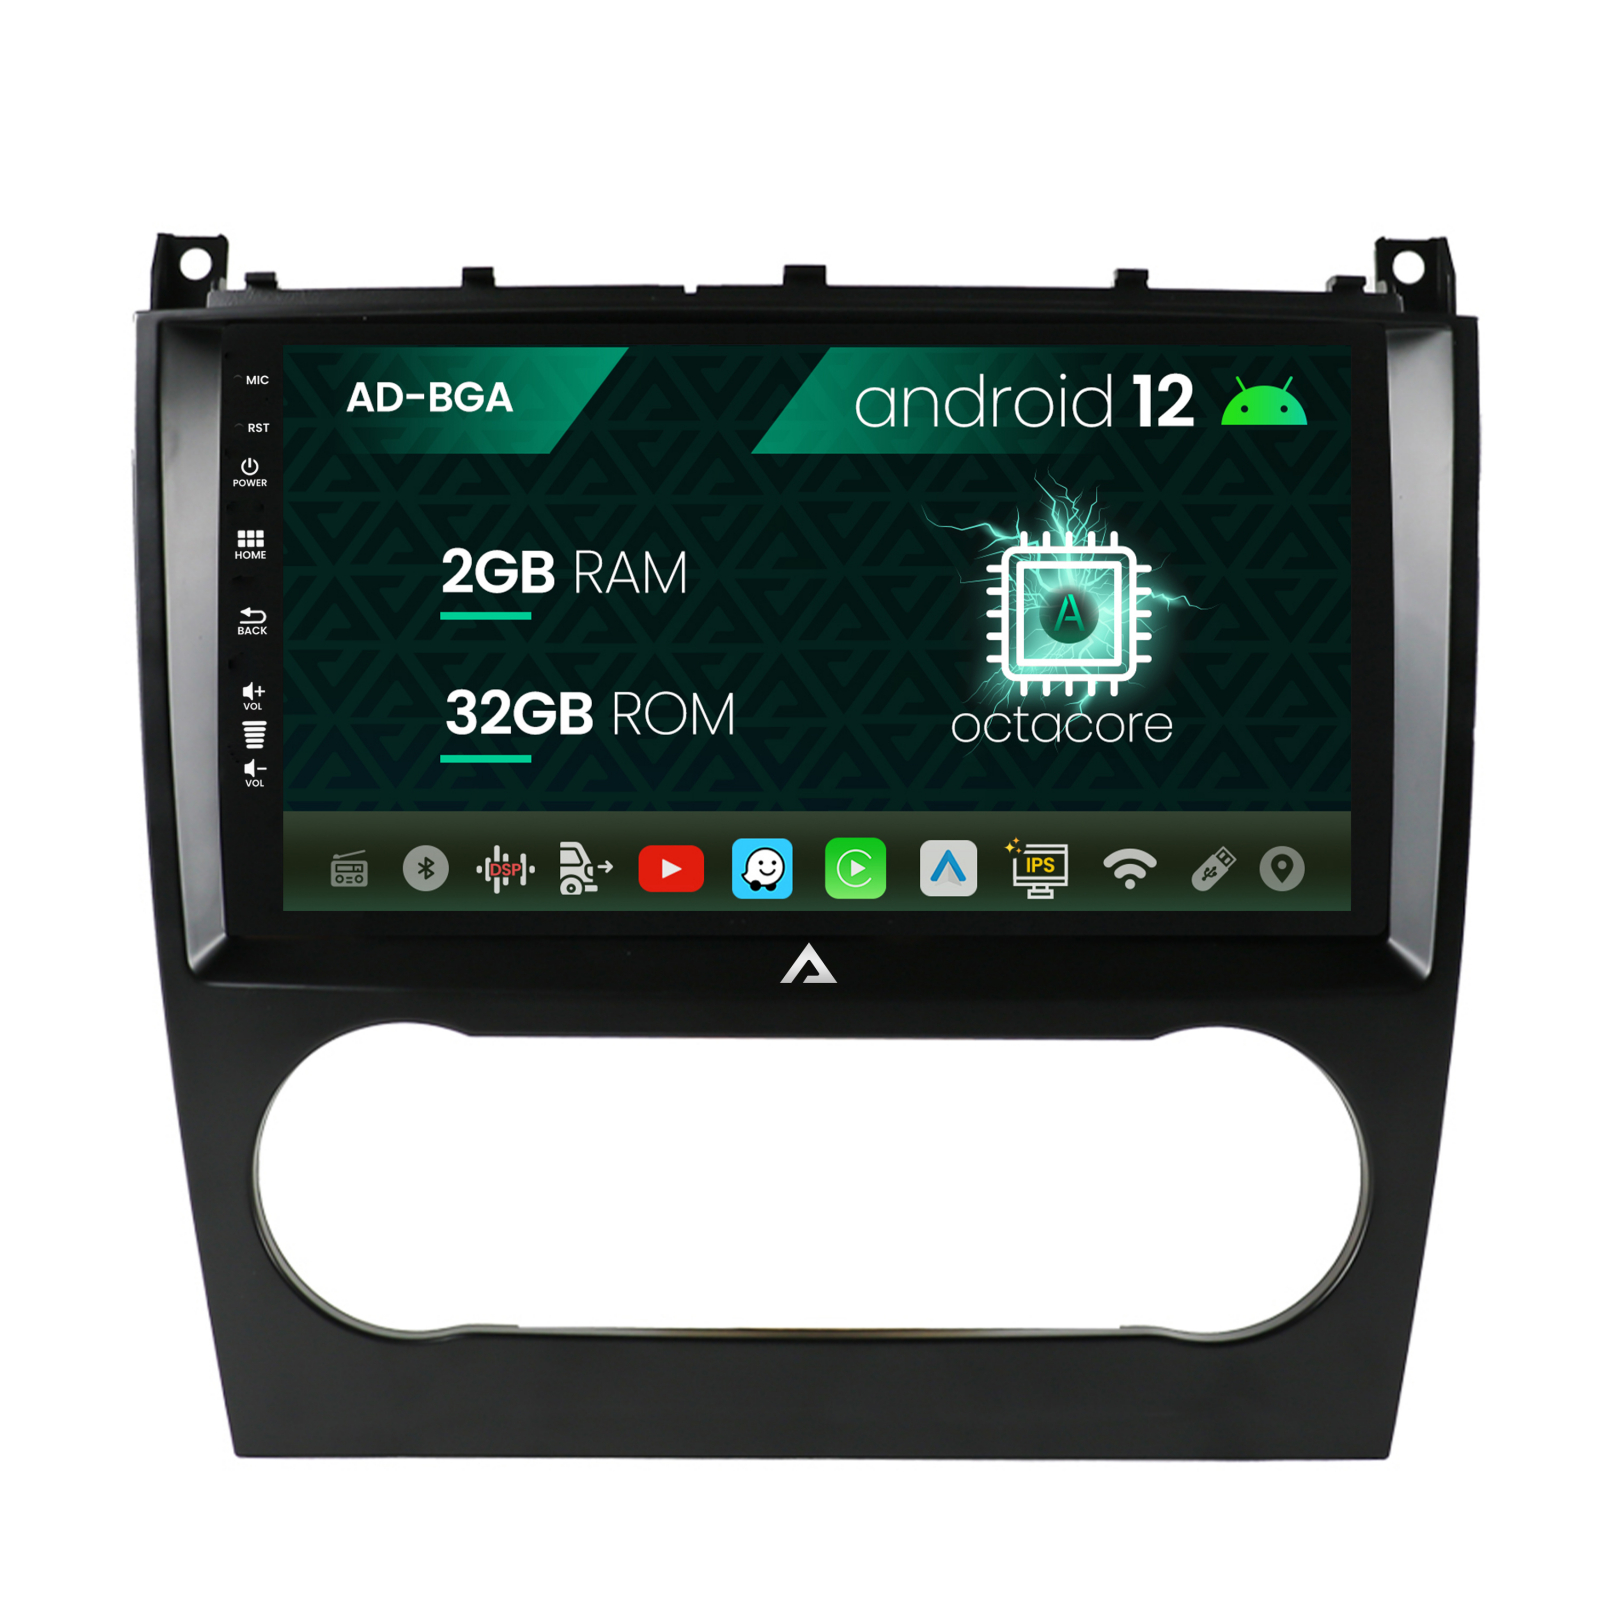 Navigatie Mercedes Benz C-Class W203 (2004-2011), Android 12, A-Octacore / 2GB RAM + 32GB ROM, 9 INCH - AD-BGA9002+AD-BGRKIT414